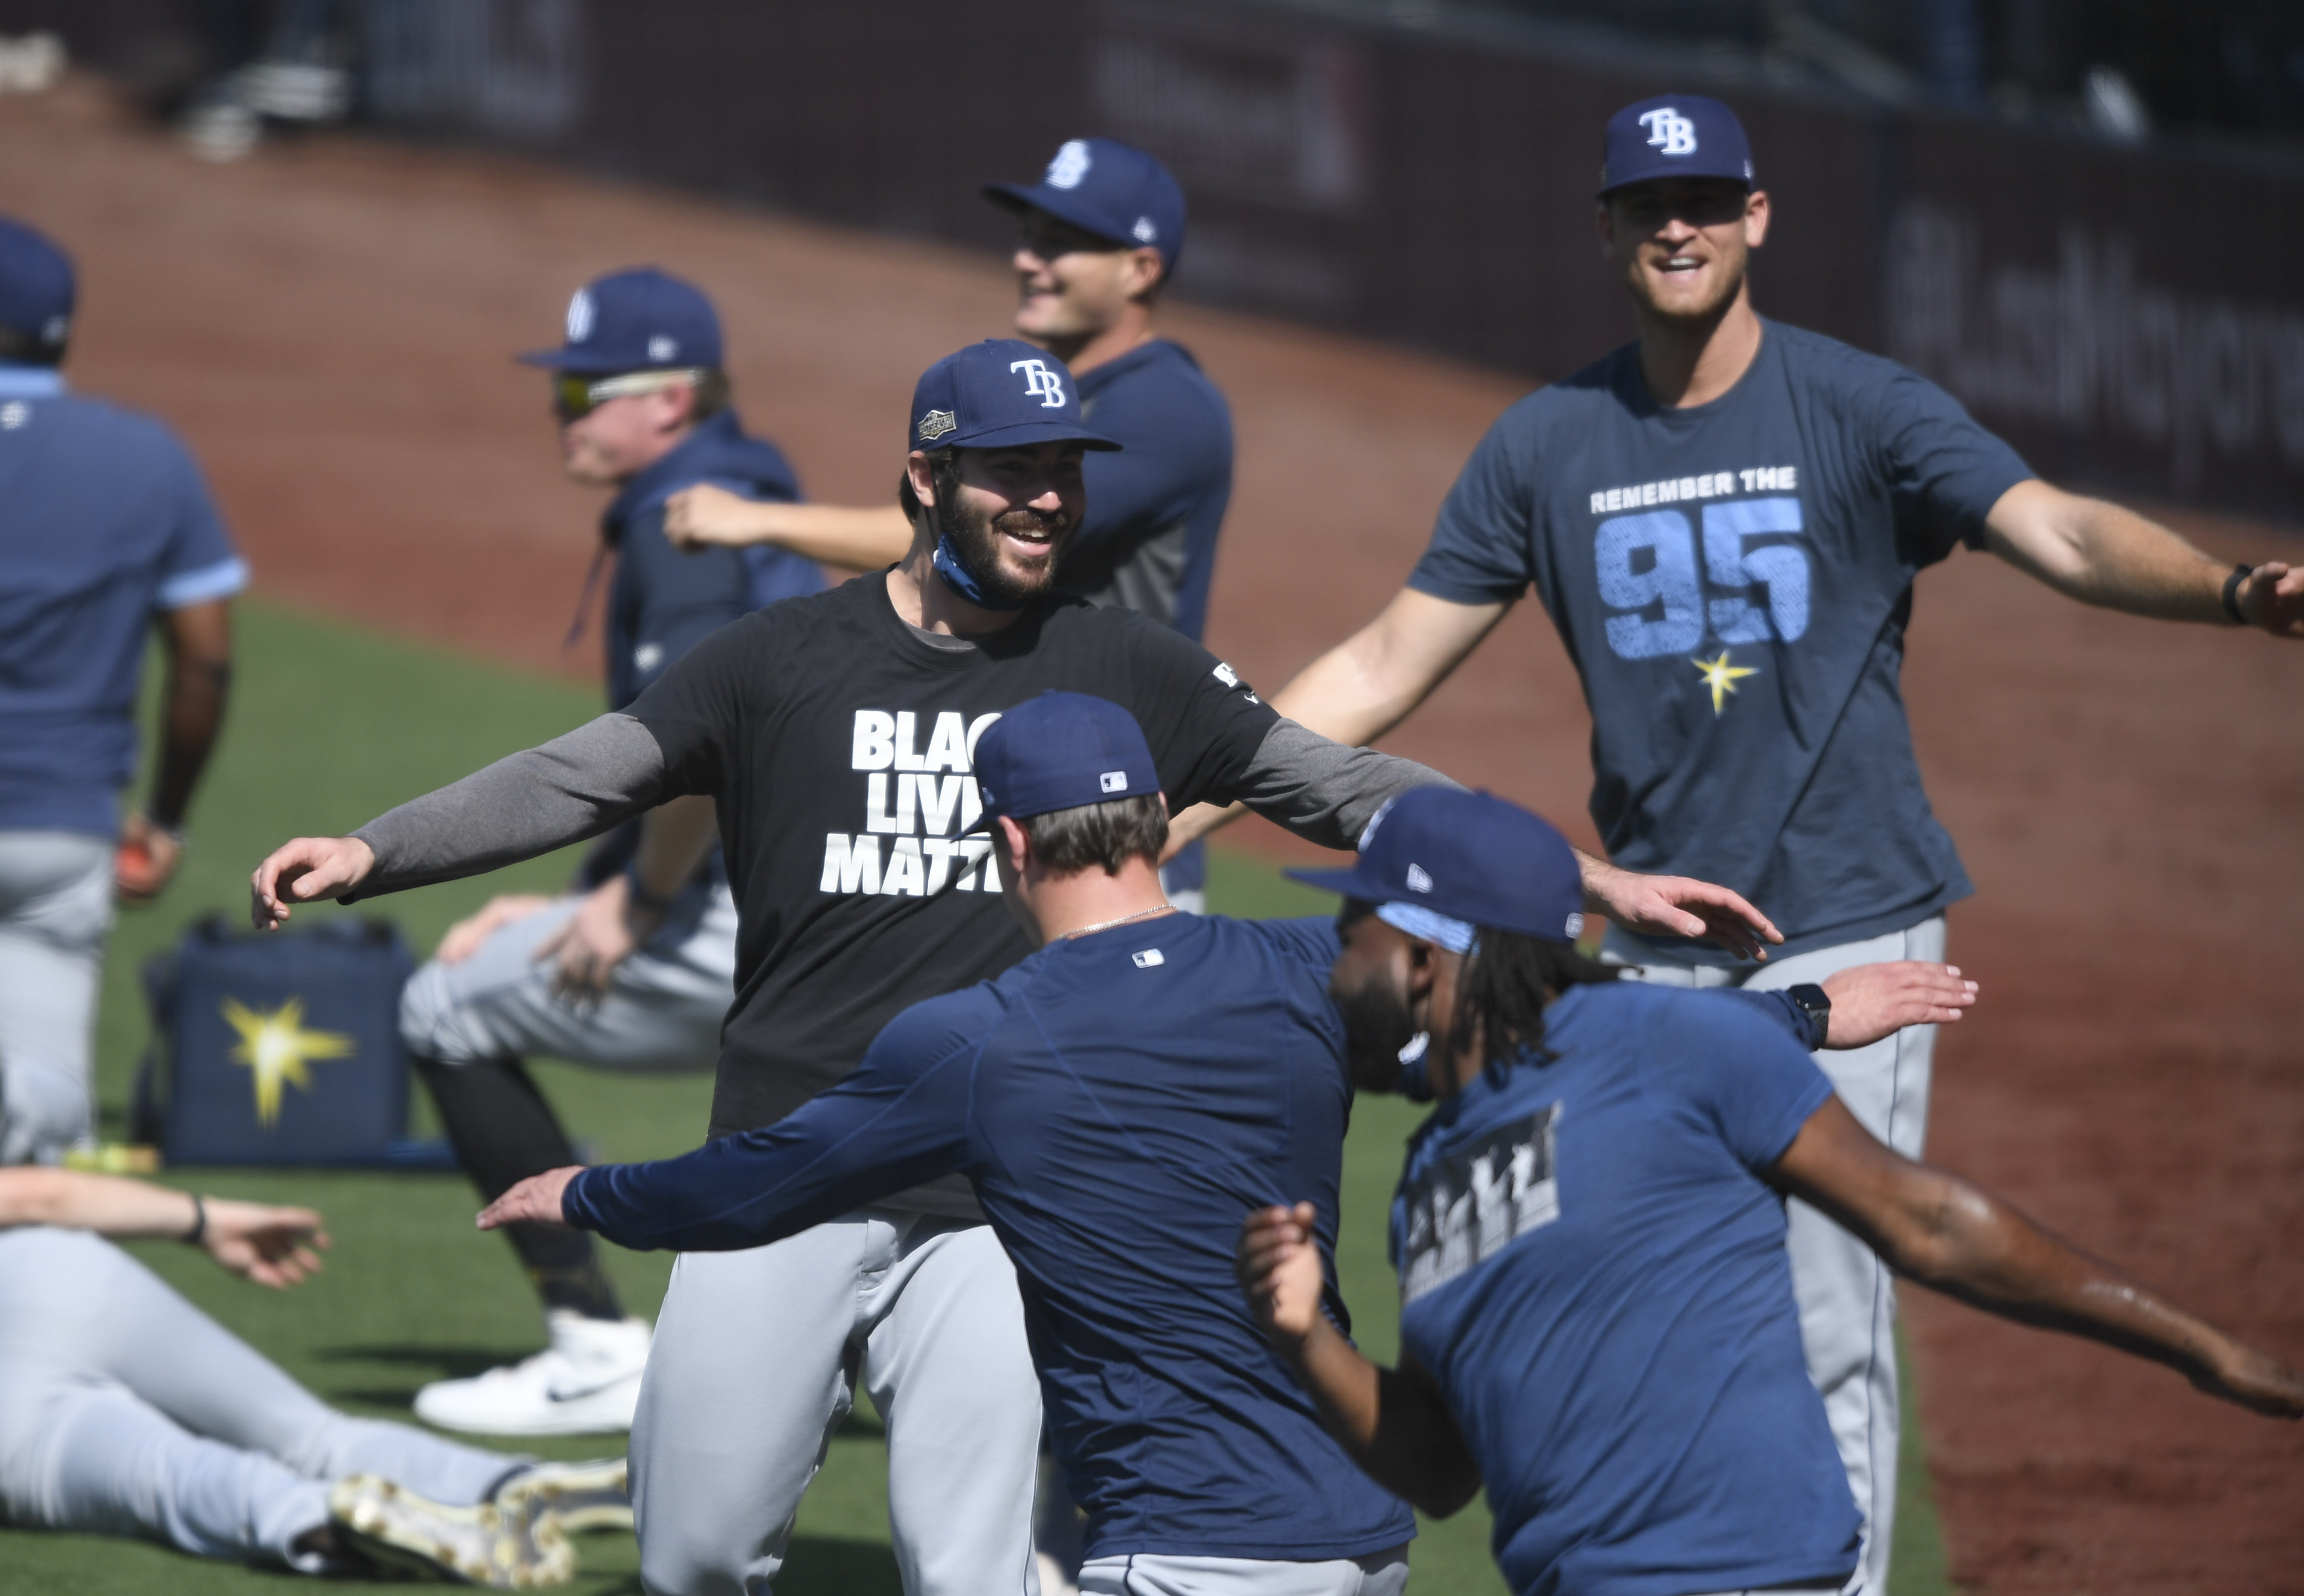 Zunino's homer helps Rays rally past A's 10-7 in 10 innings - The